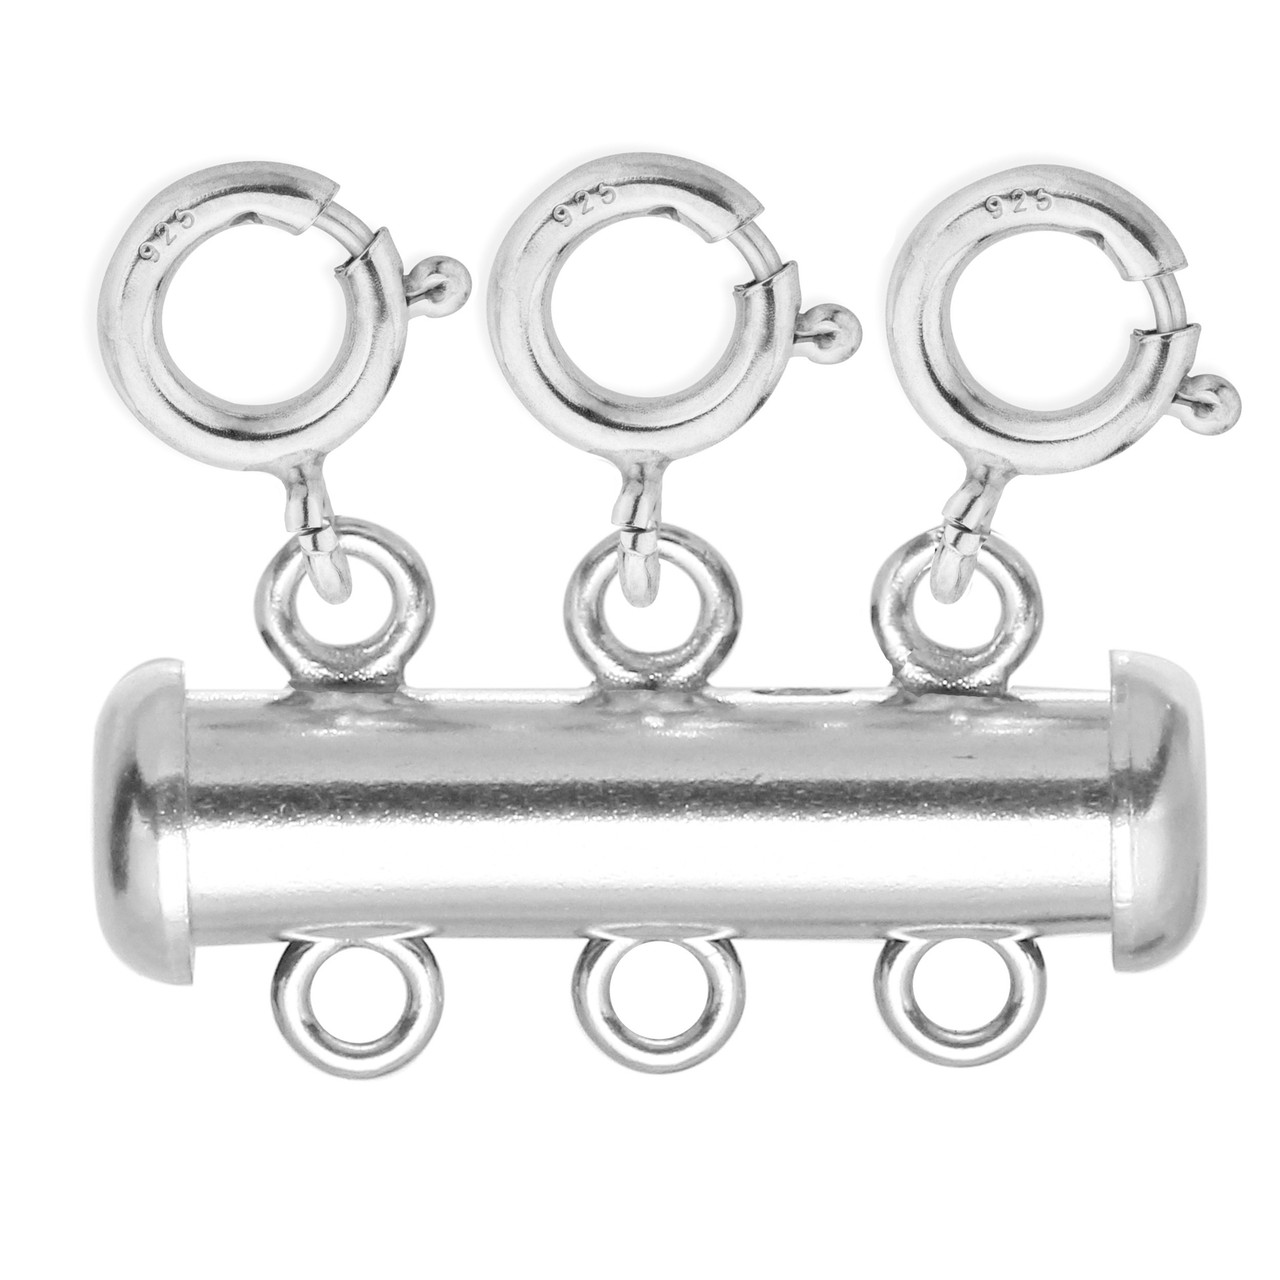 5.5mm Spring Ring Sterling Silver Clasp